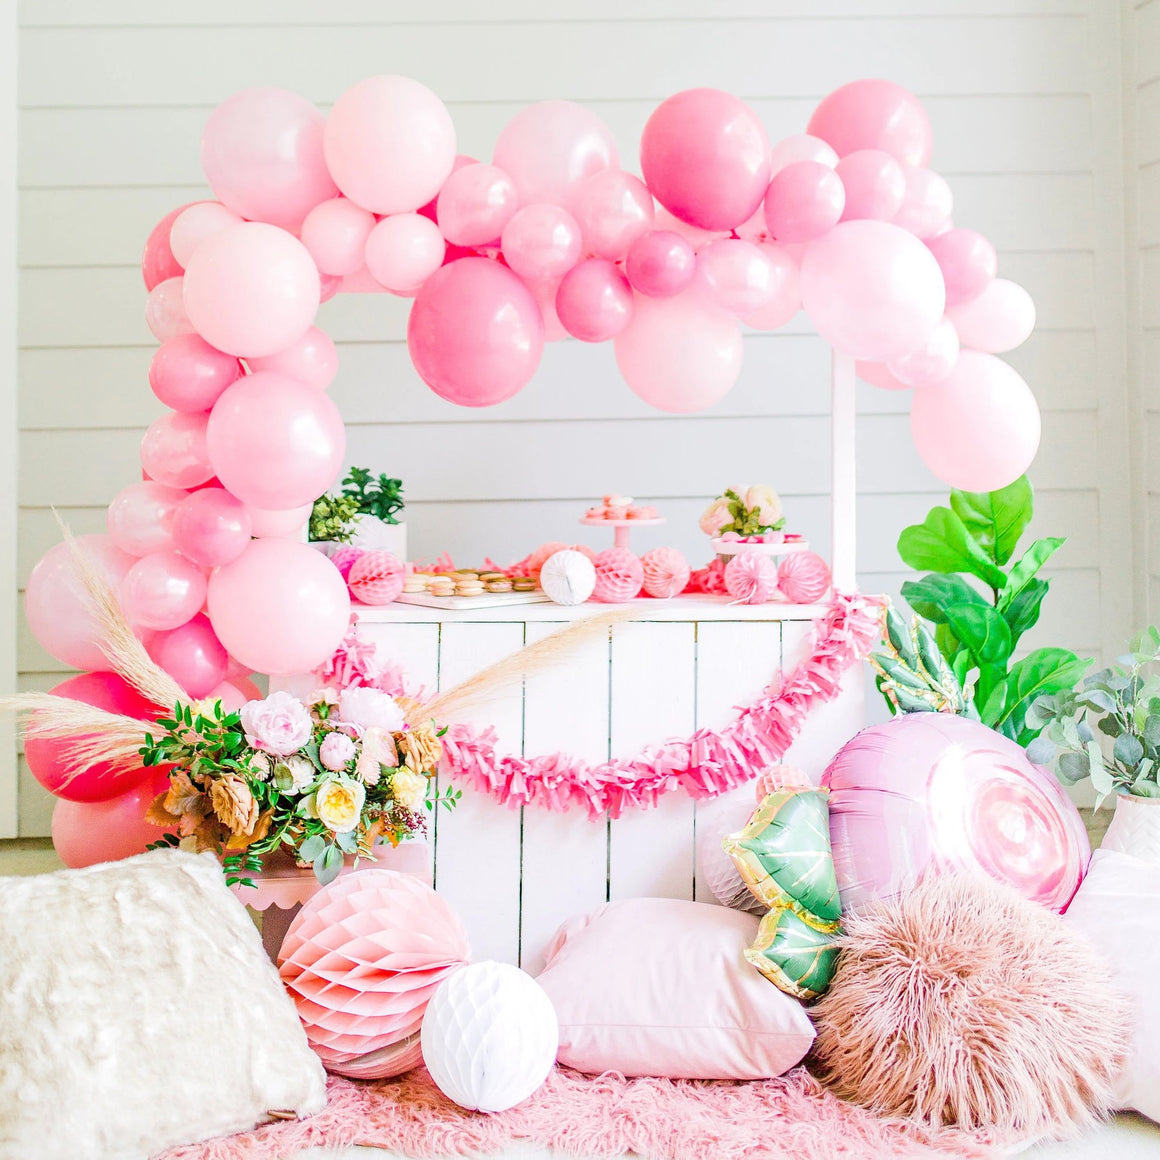 A pretty white lemonade style stand has a beautiful balloon garland draped along the top and down one of the sides. The balloon garland is the perfect mix of pink, pearl pink, and rose colored balloons.